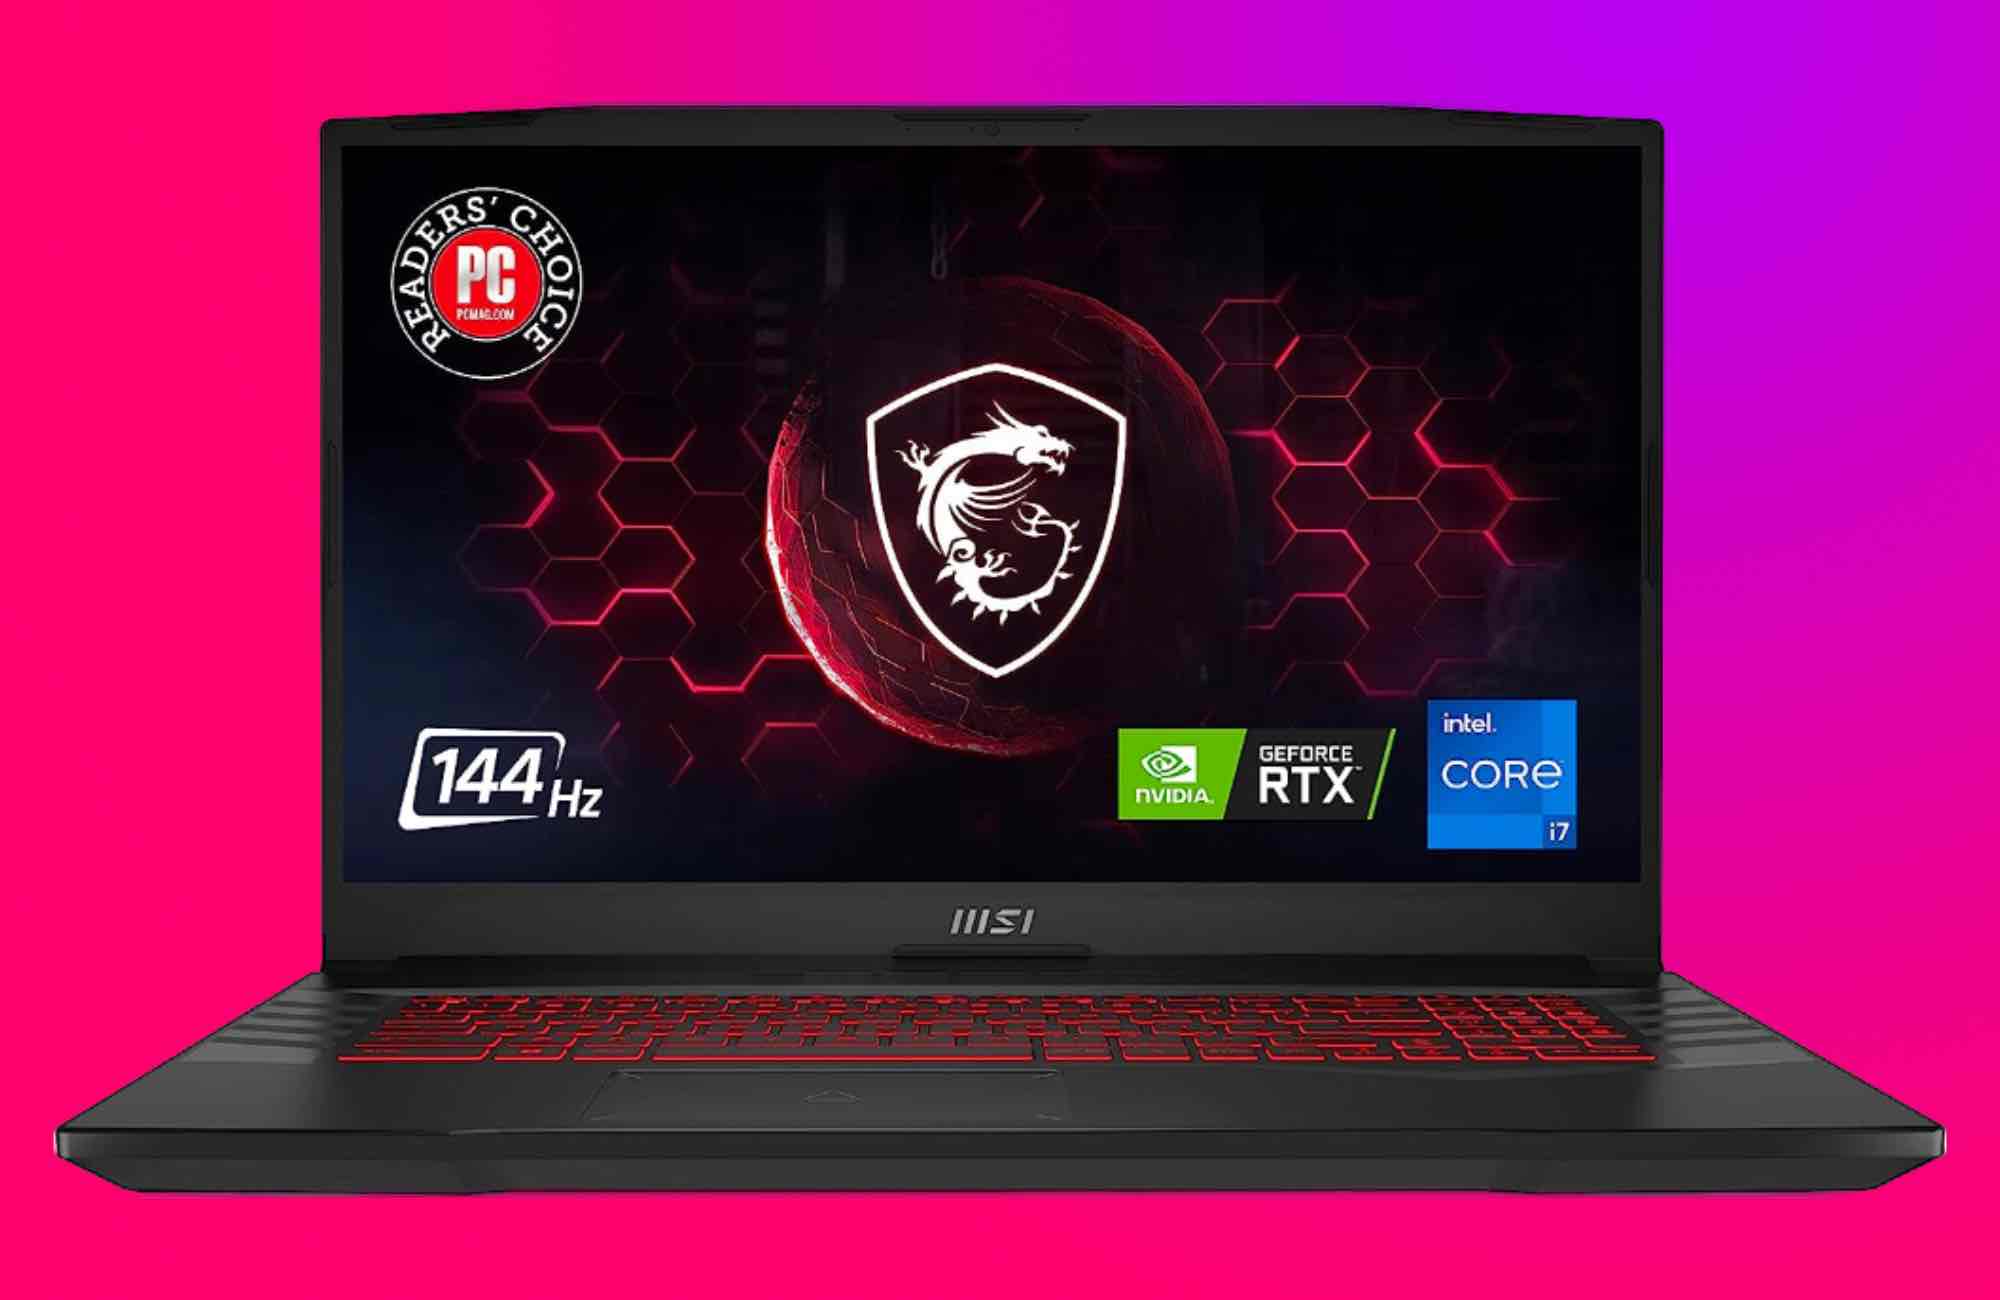 MSI's premium gaming laptop is now available at its lowest price ever on